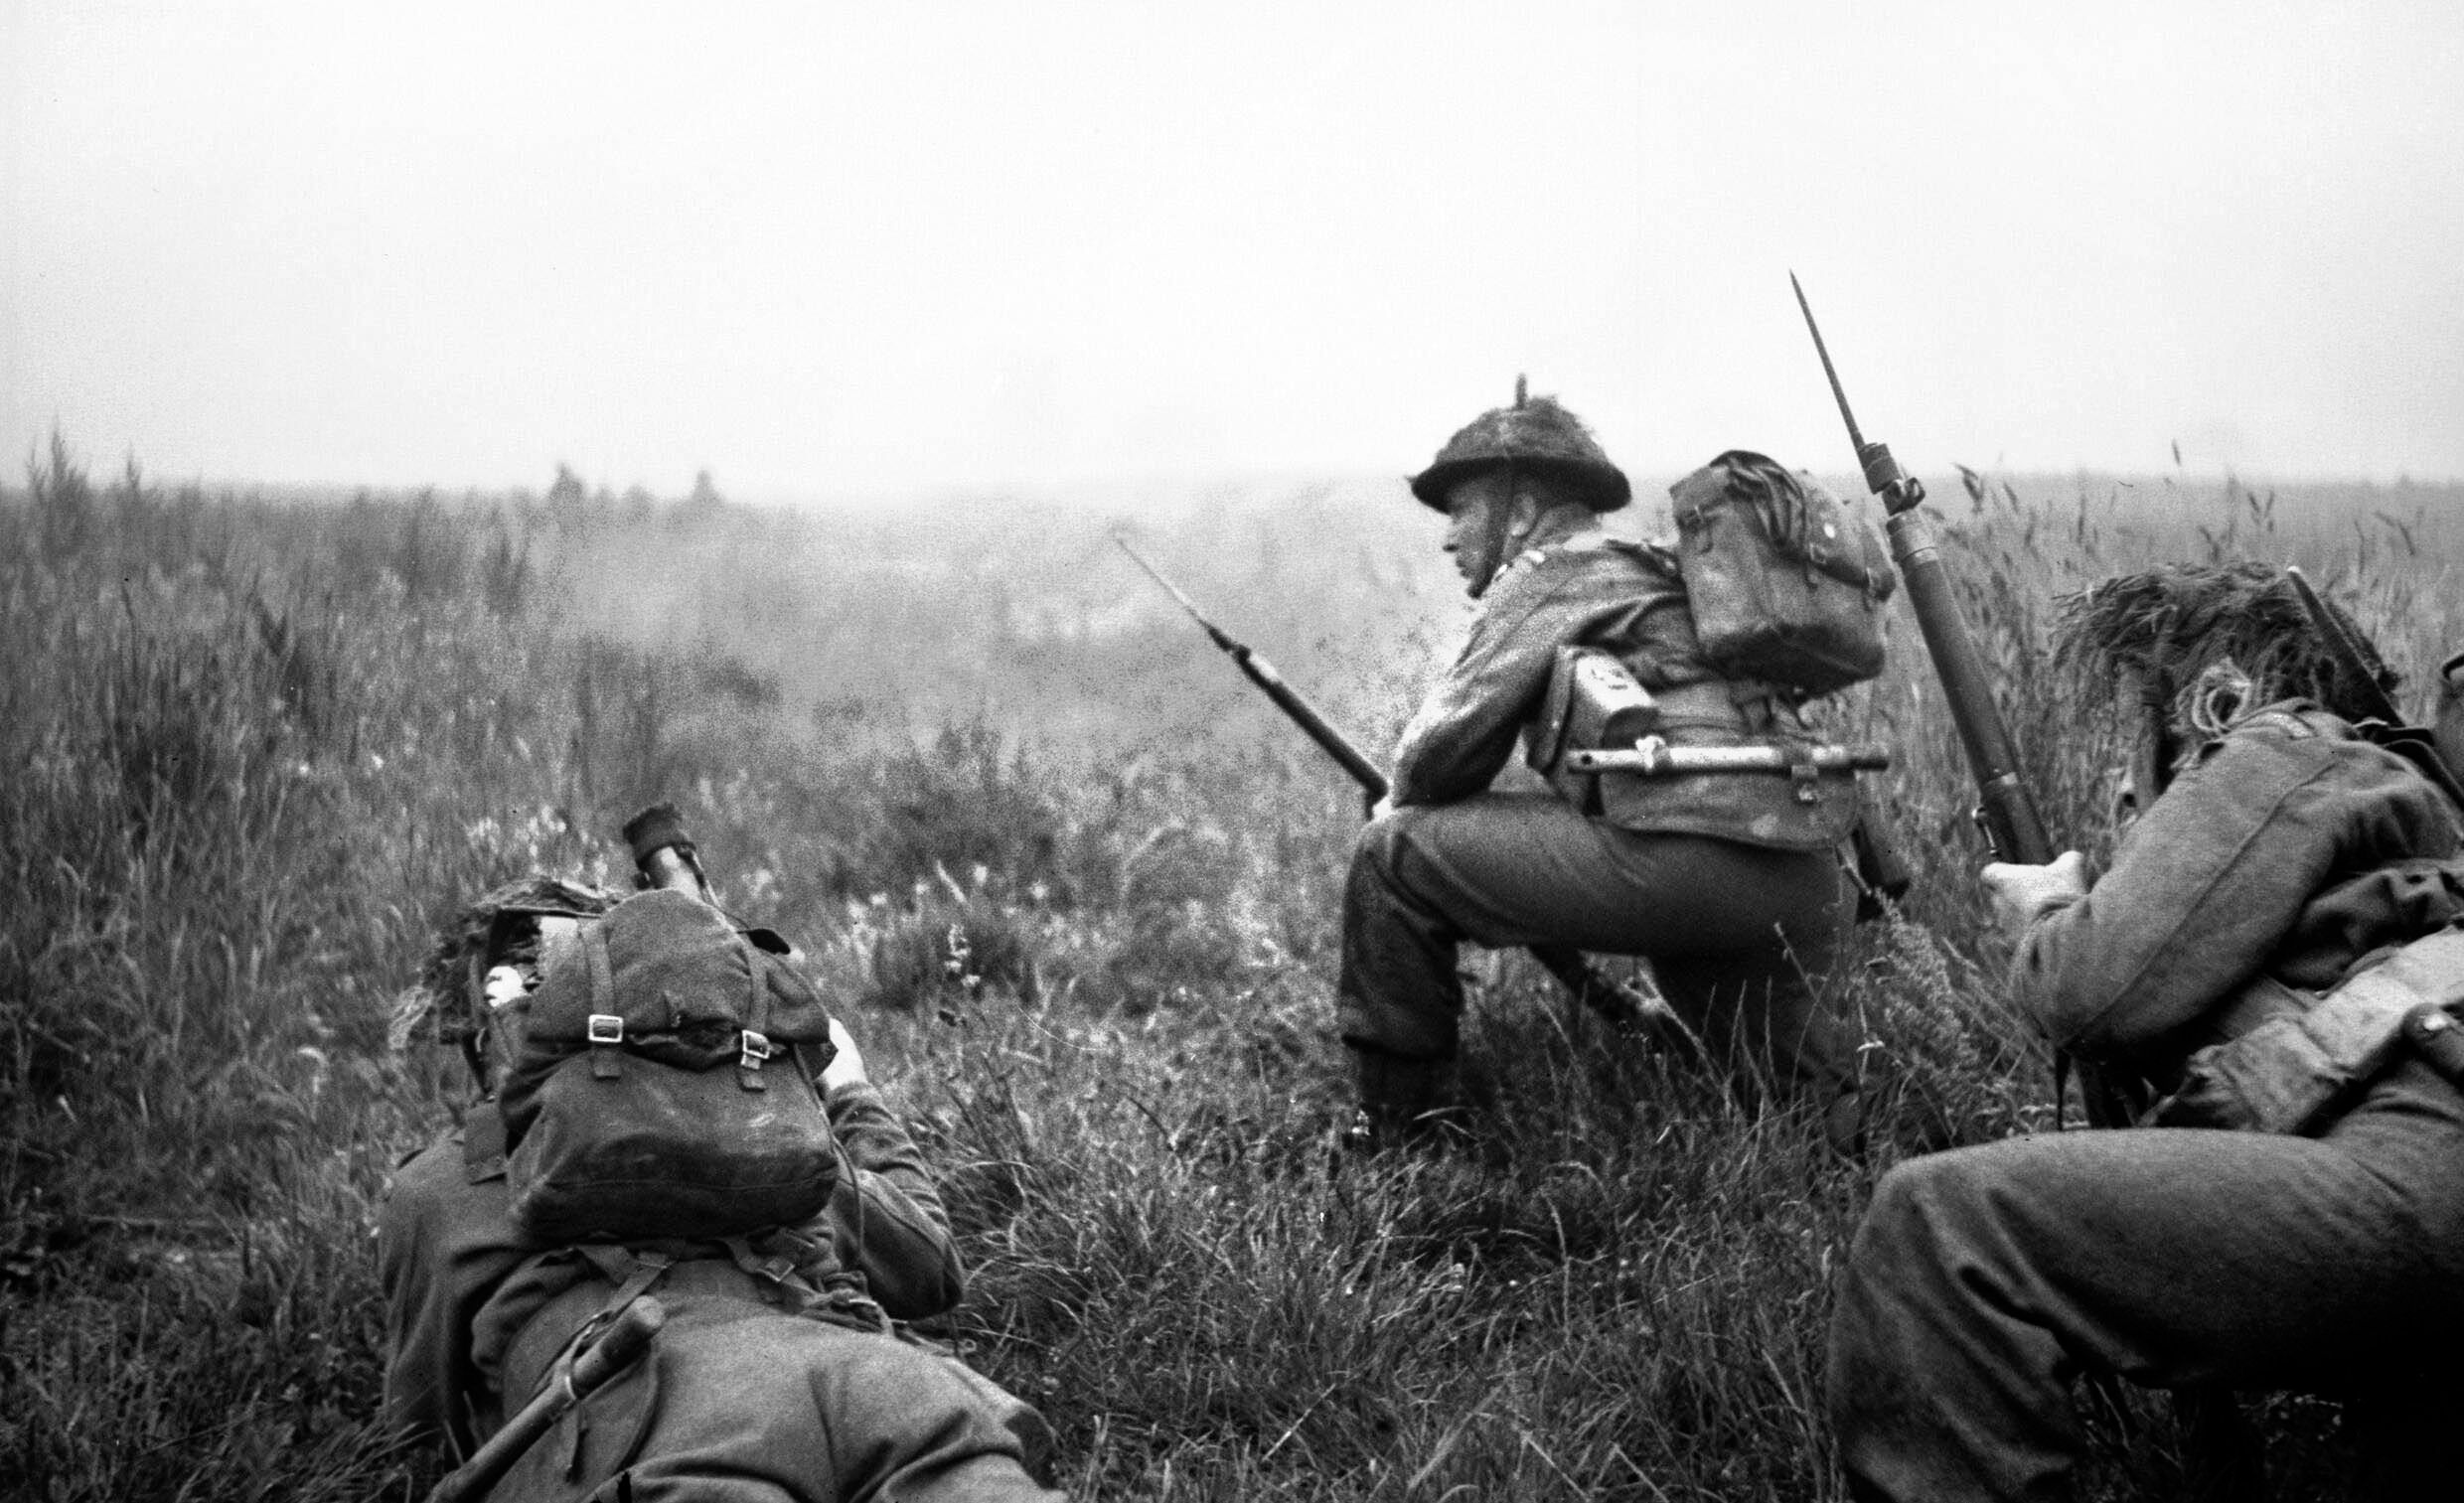 Soldiers of the 6th Royal Scots Fusiliers prepare to move forward during Operation Epsom, one of Field Marshal Montgomery's attempts to capture Caen, on June 26, 1944.